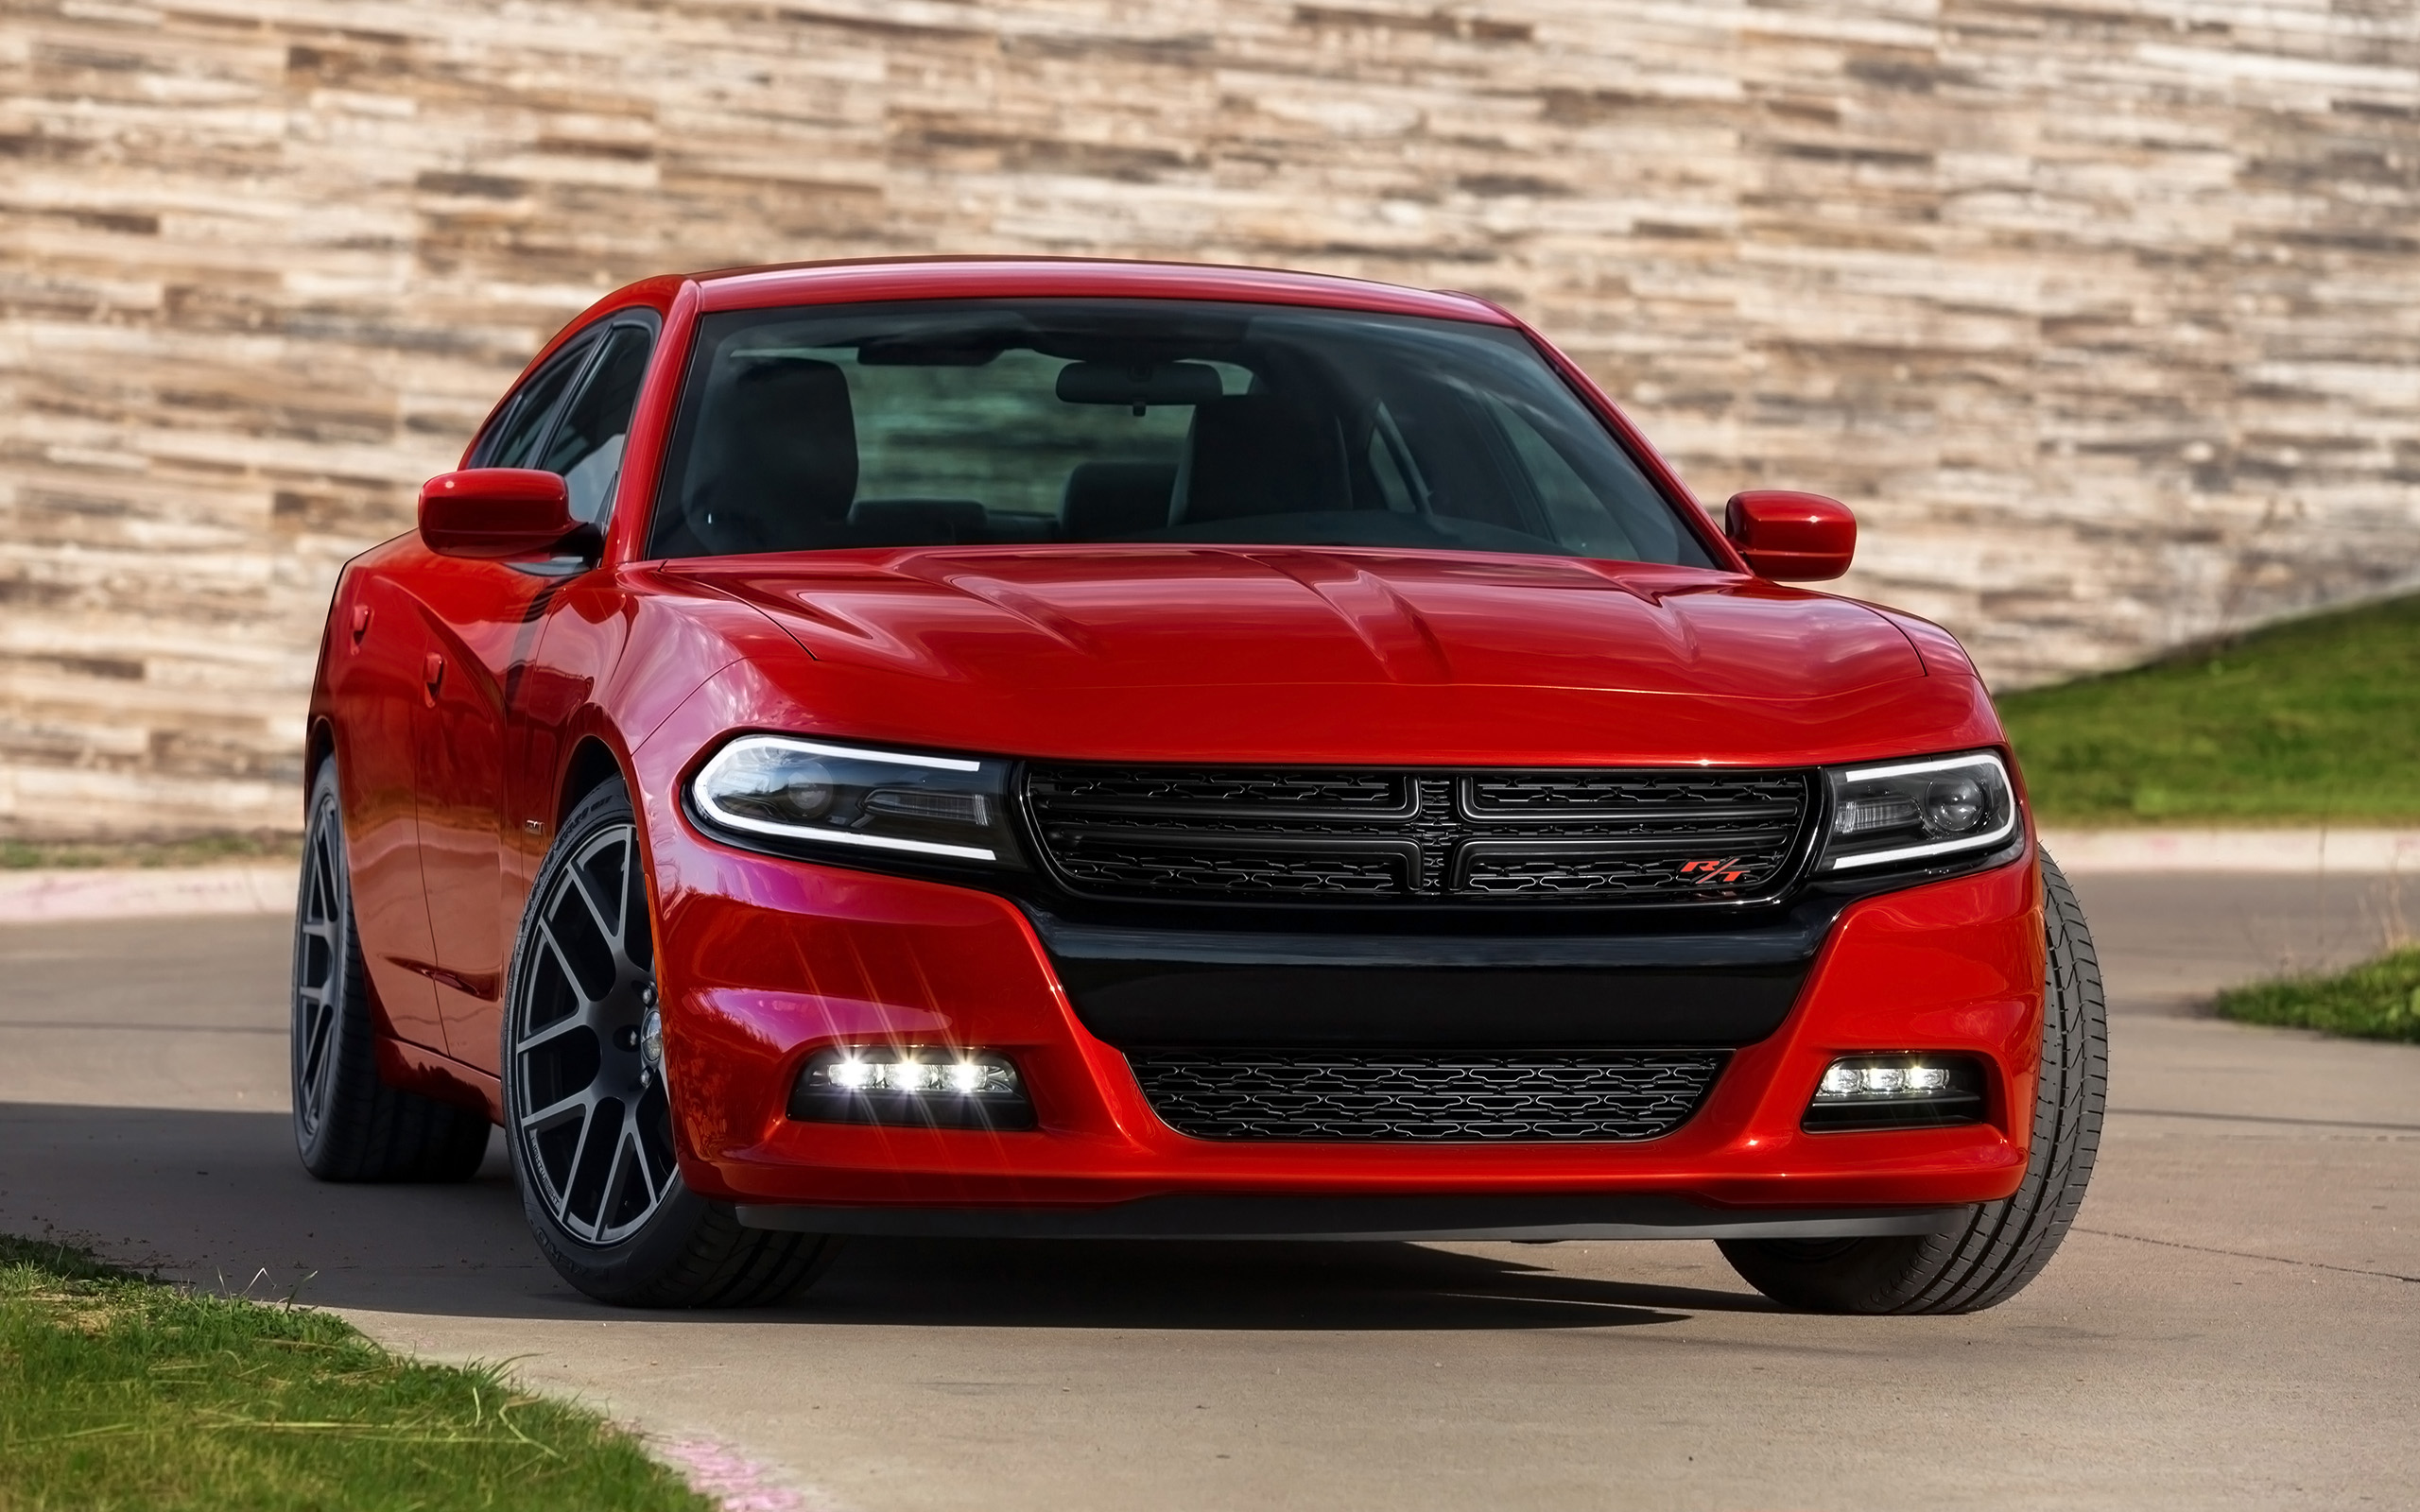 2015 Dodge Charger Wallpaper HD Car Wallpapers